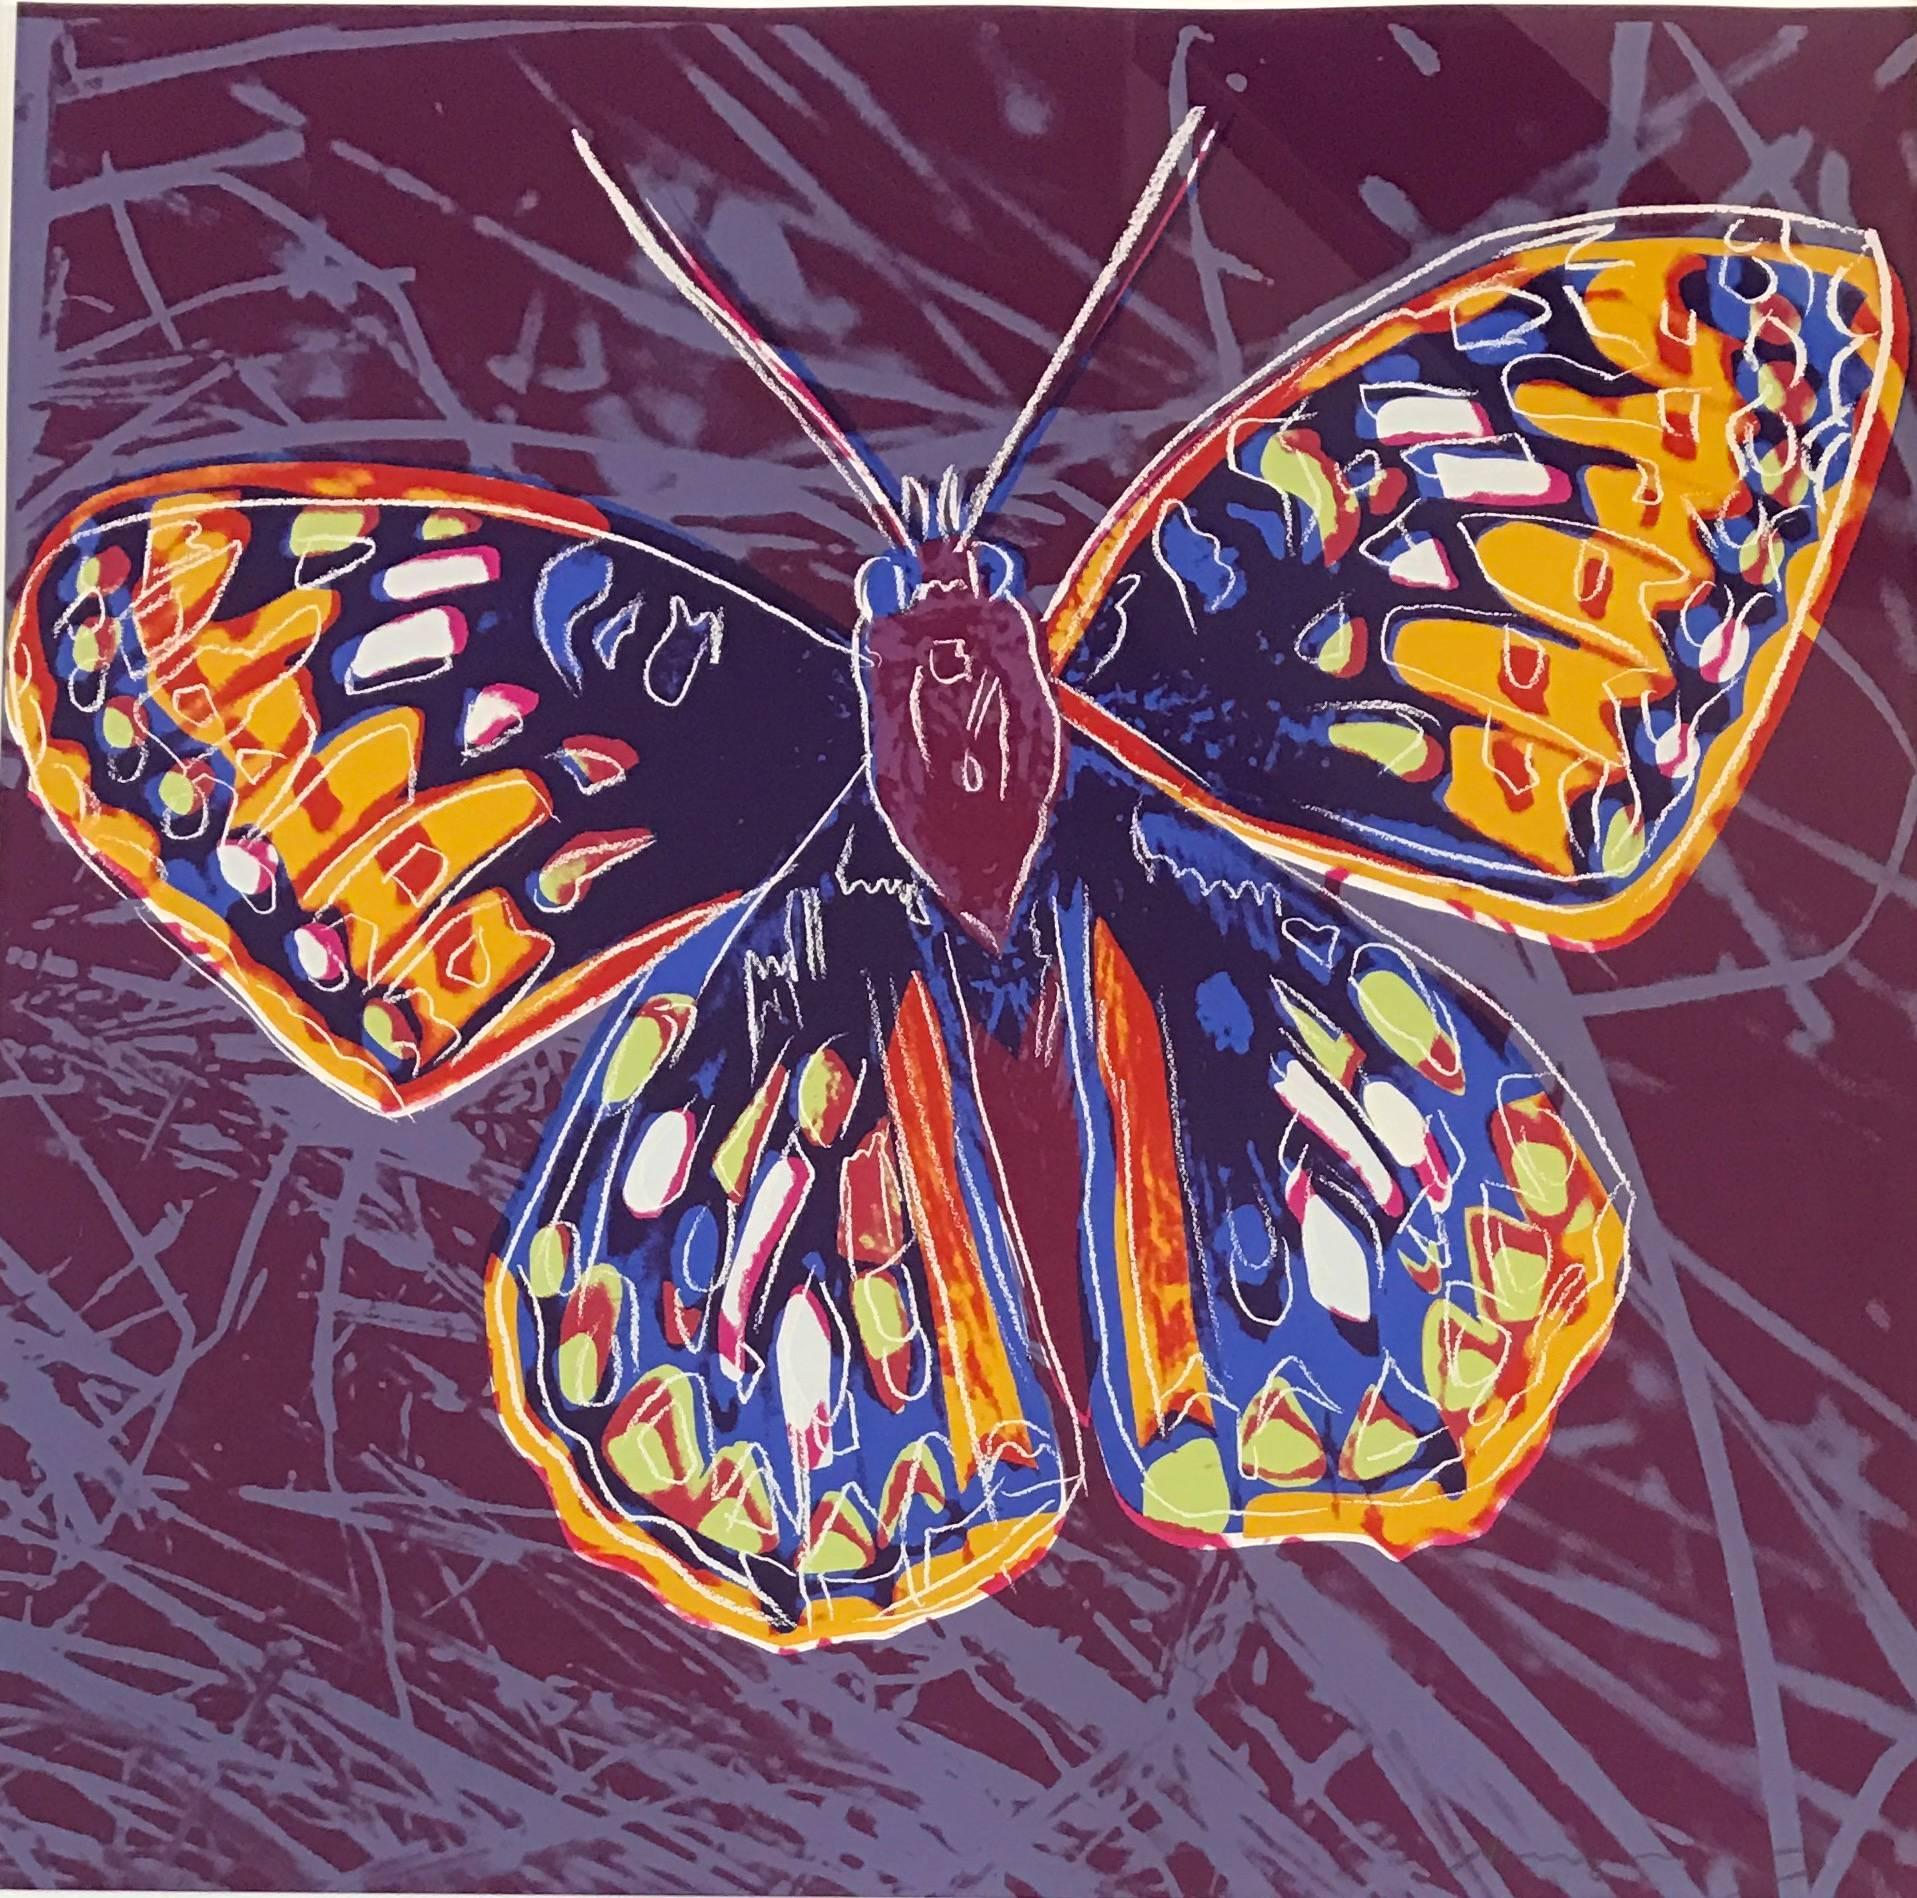 Andy Warhol Animal Print - San Francisco Silverspot from Endangered Species, F&S II.298